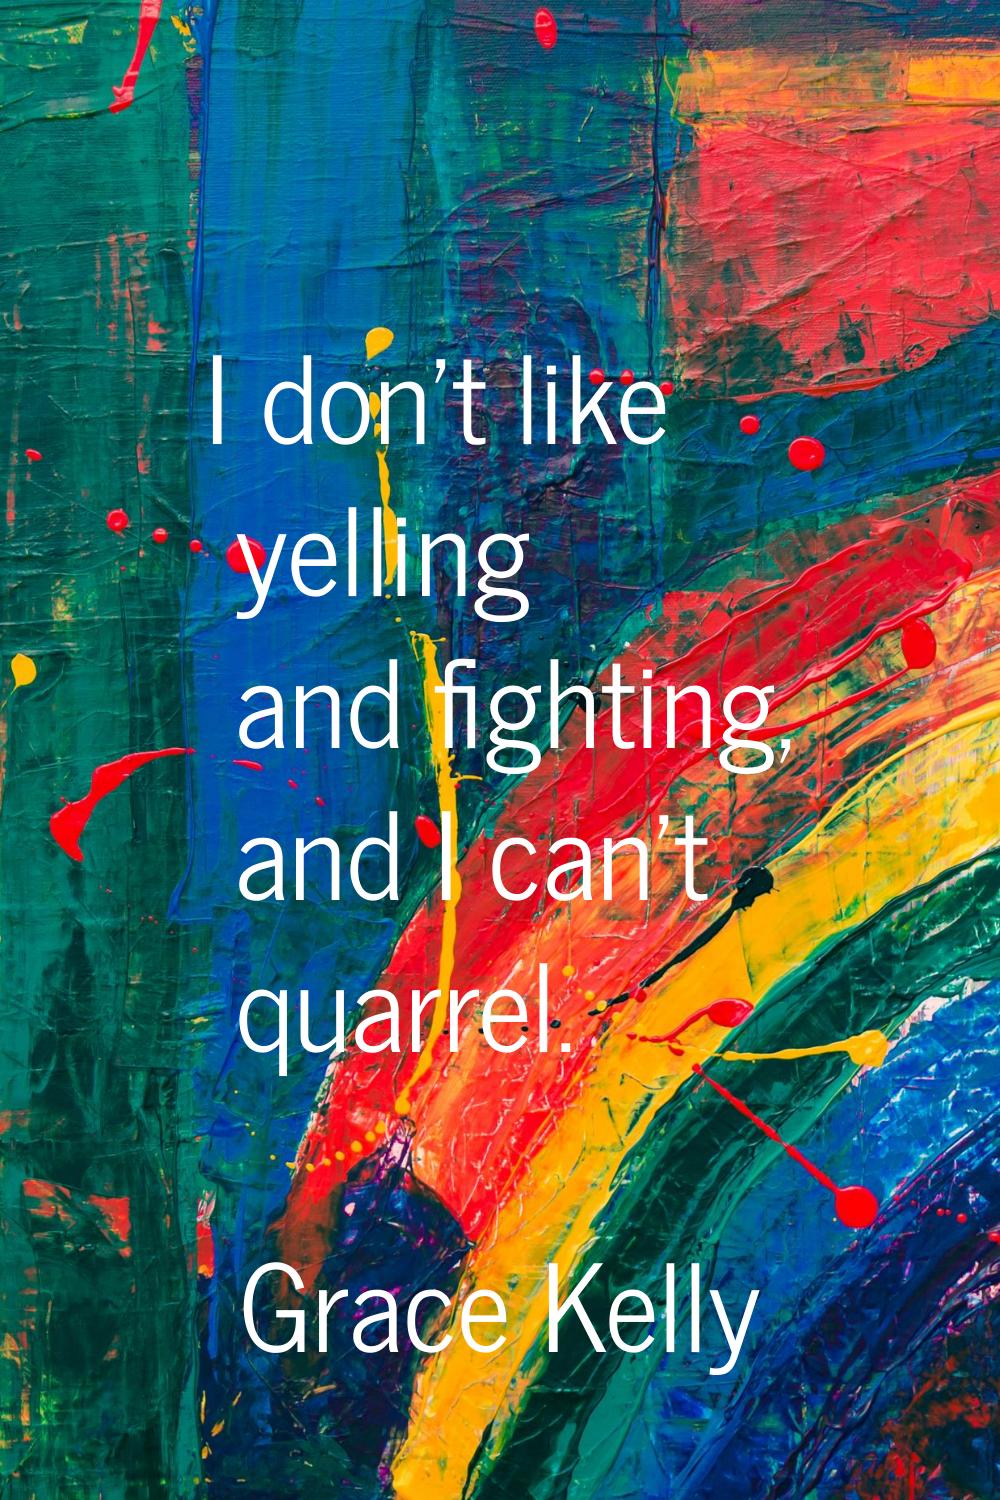 I don't like yelling and fighting, and I can't quarrel.